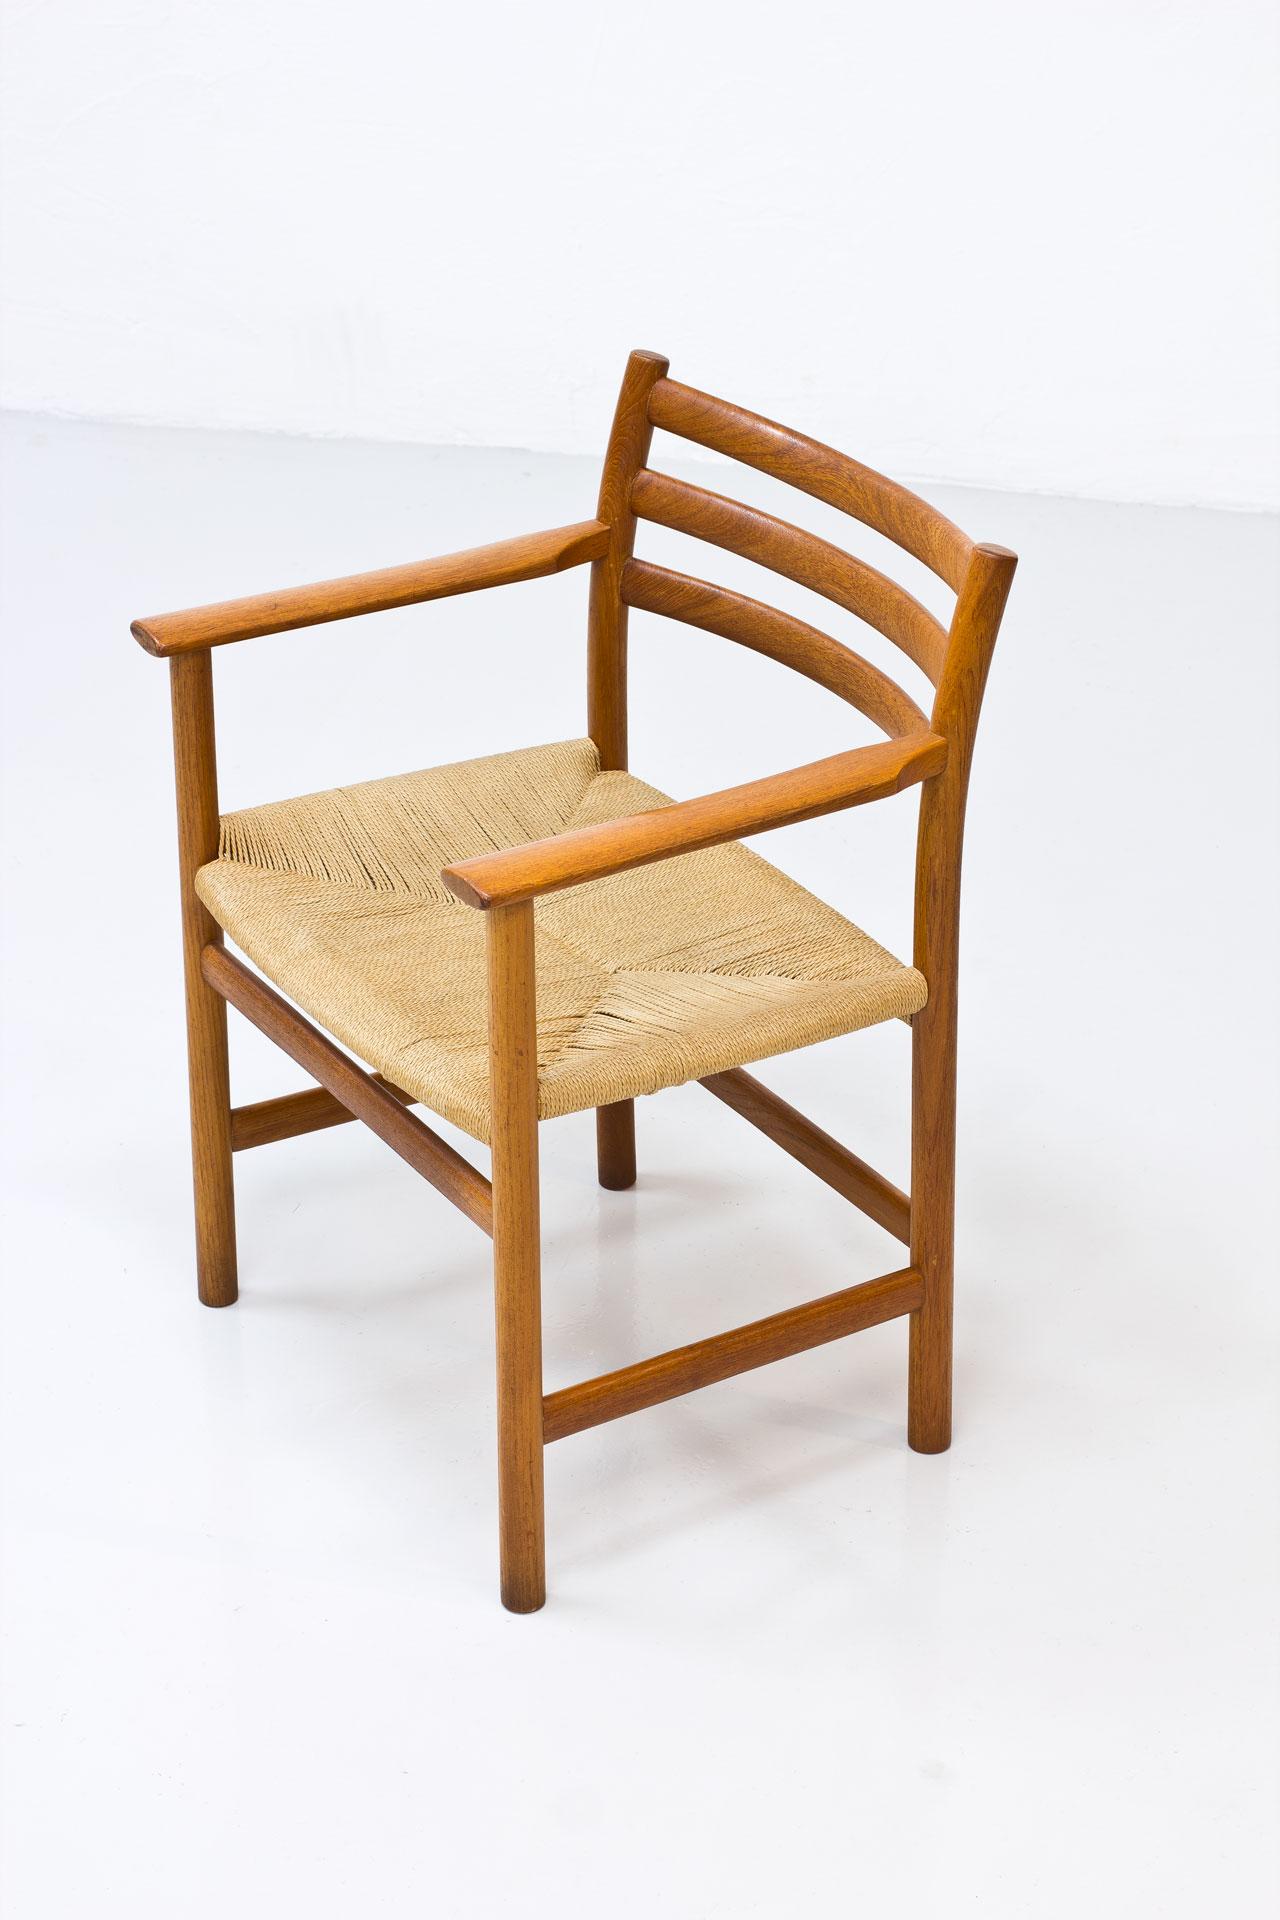 Armchair model 351 designed by Poul Volther.
Manufactured in Denmark by Sorø Stolefabrik during the 1960s.
Made from teak with paper cord seat.